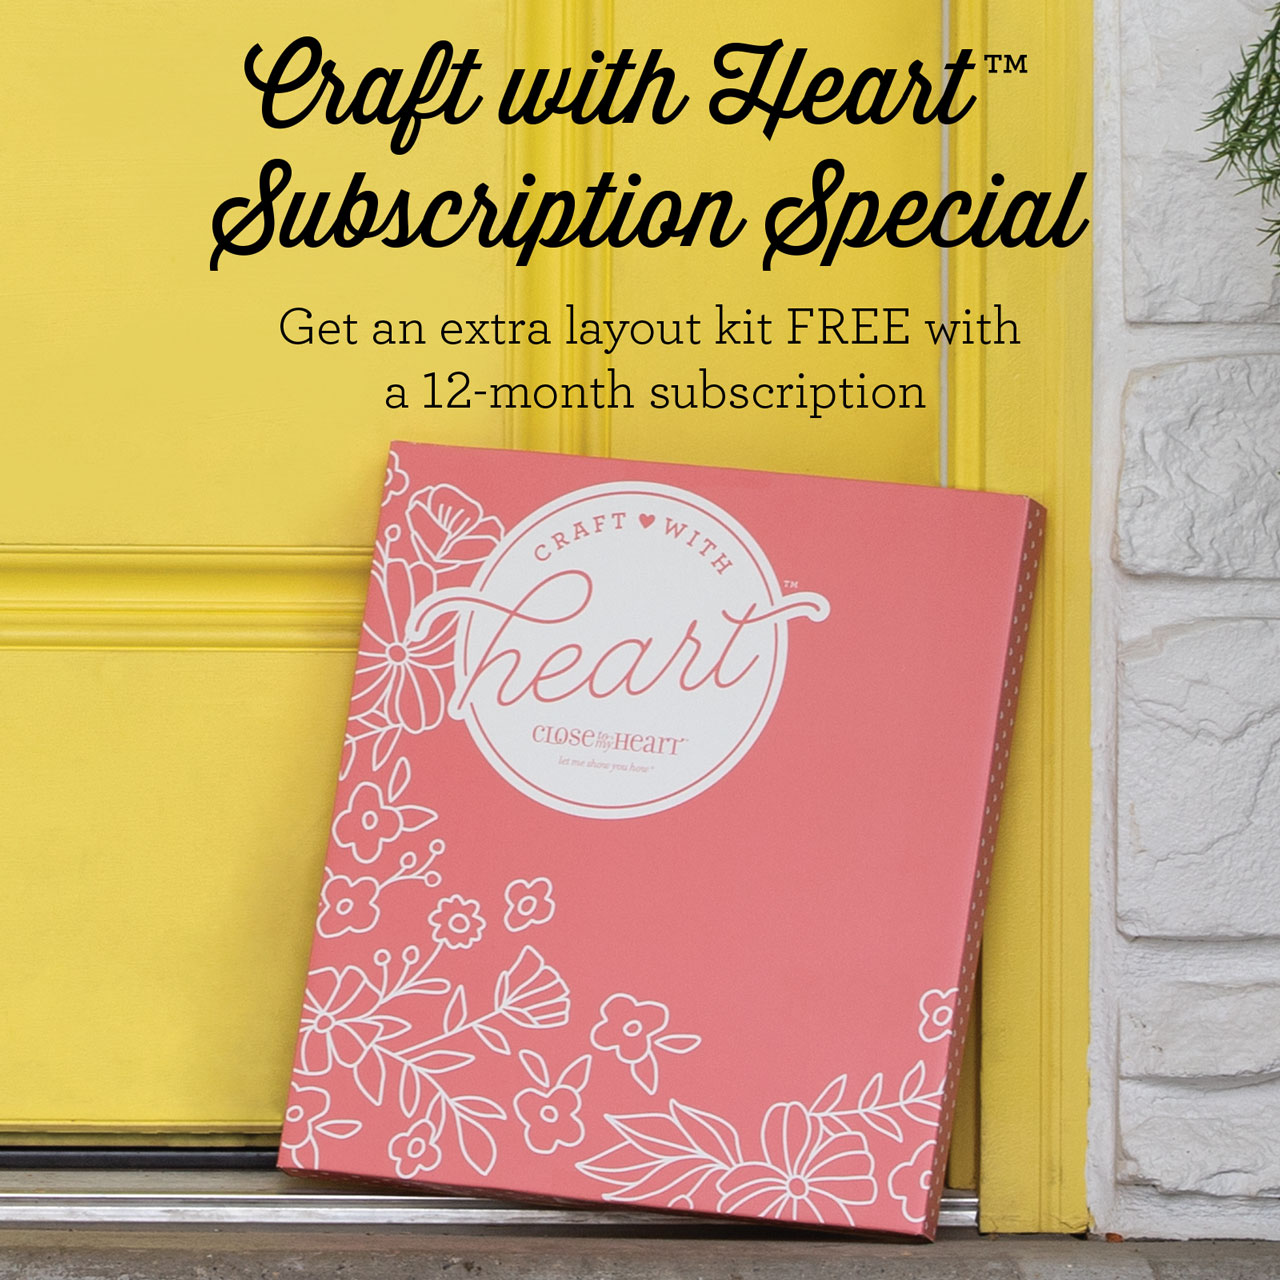 Craft with Heart